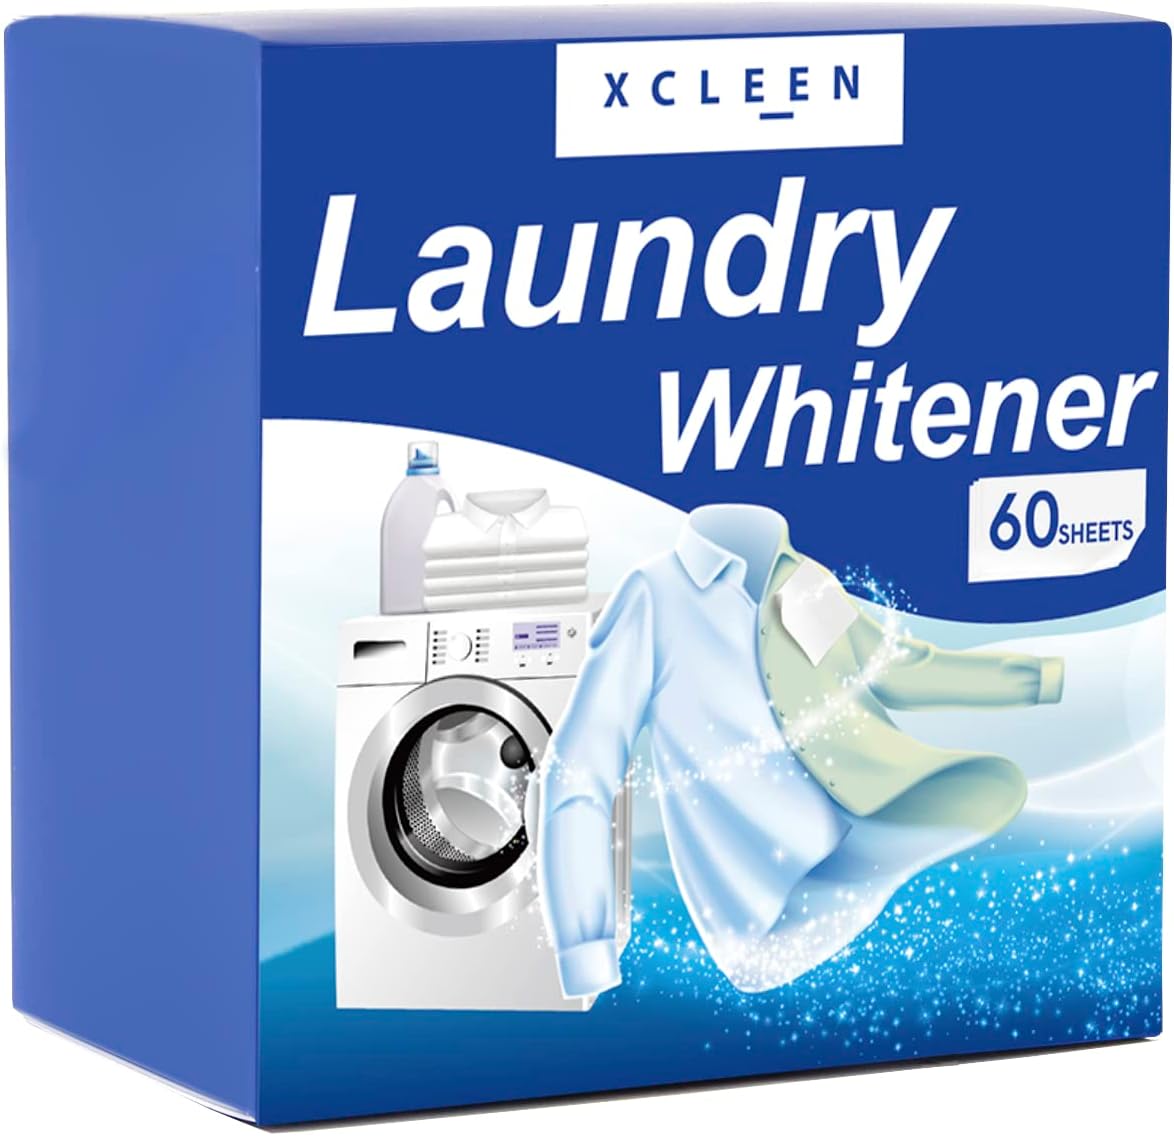 Laundry Whitener Sheets 60 count, Chlorine Free, Fragrance Free Bleach for White Clothes, Safe for Use in All Washing Machines